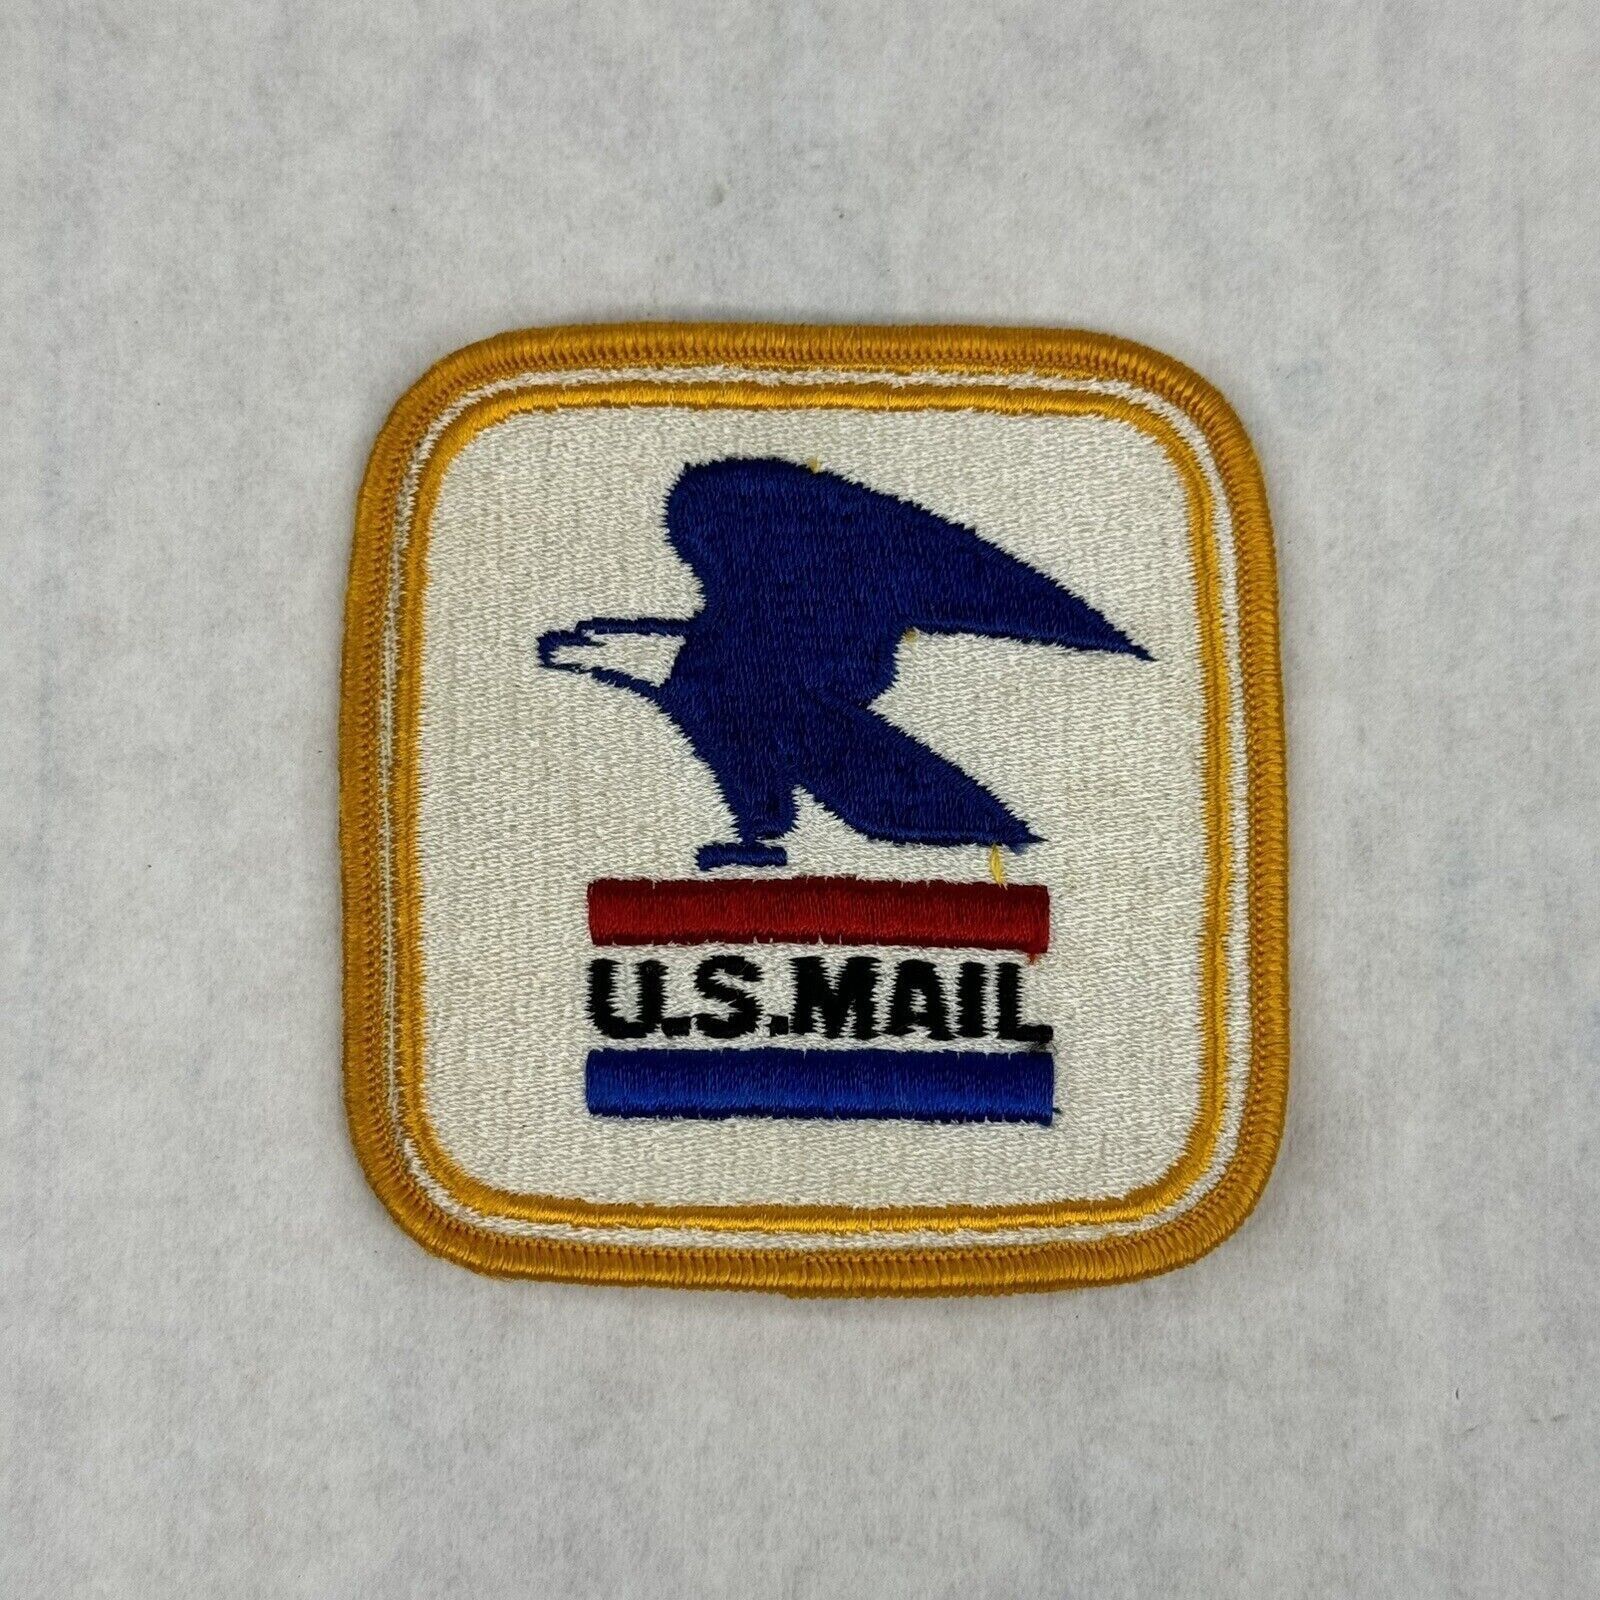 Vintage USPS US Mail Eagle Logo Patch United States Post Office 3.25”x3.25”